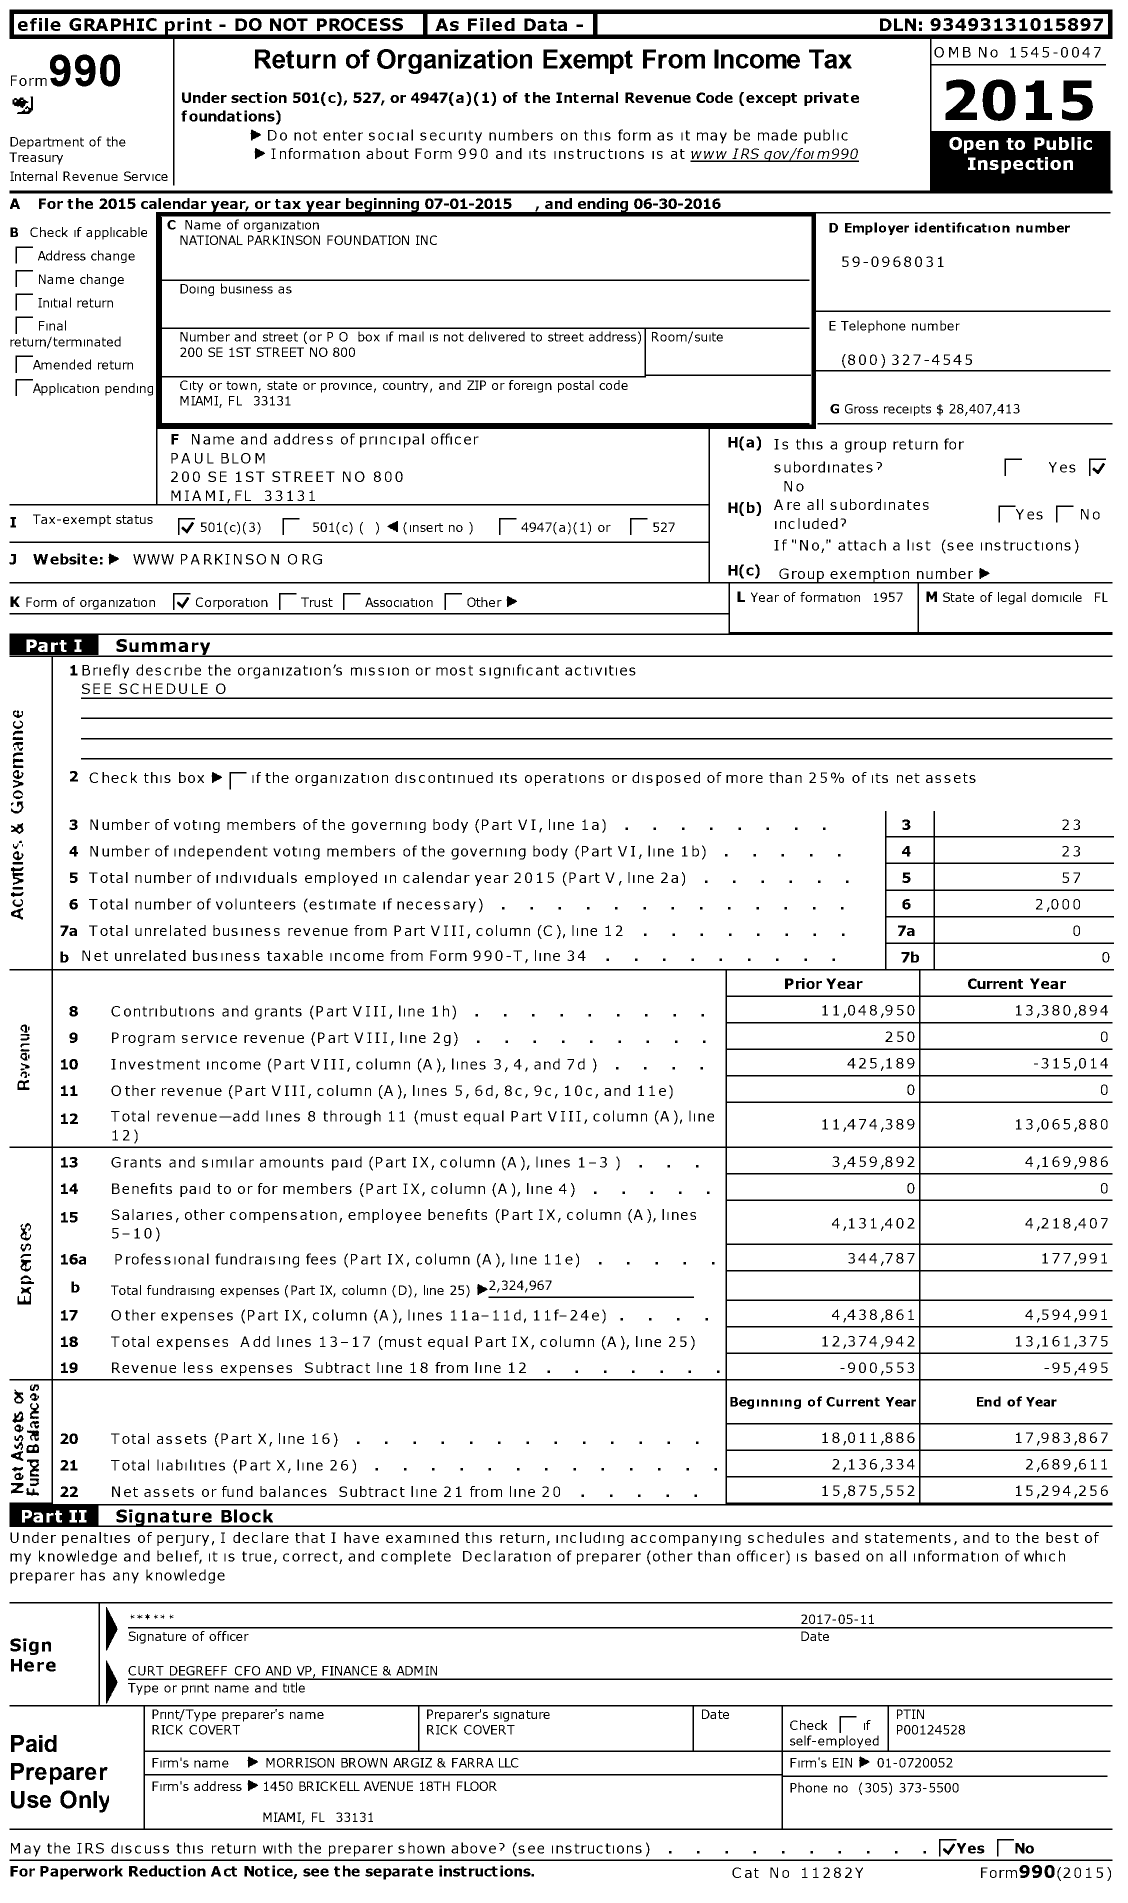 Image of first page of 2015 Form 990 for National Parkinson Foundation (NPF)